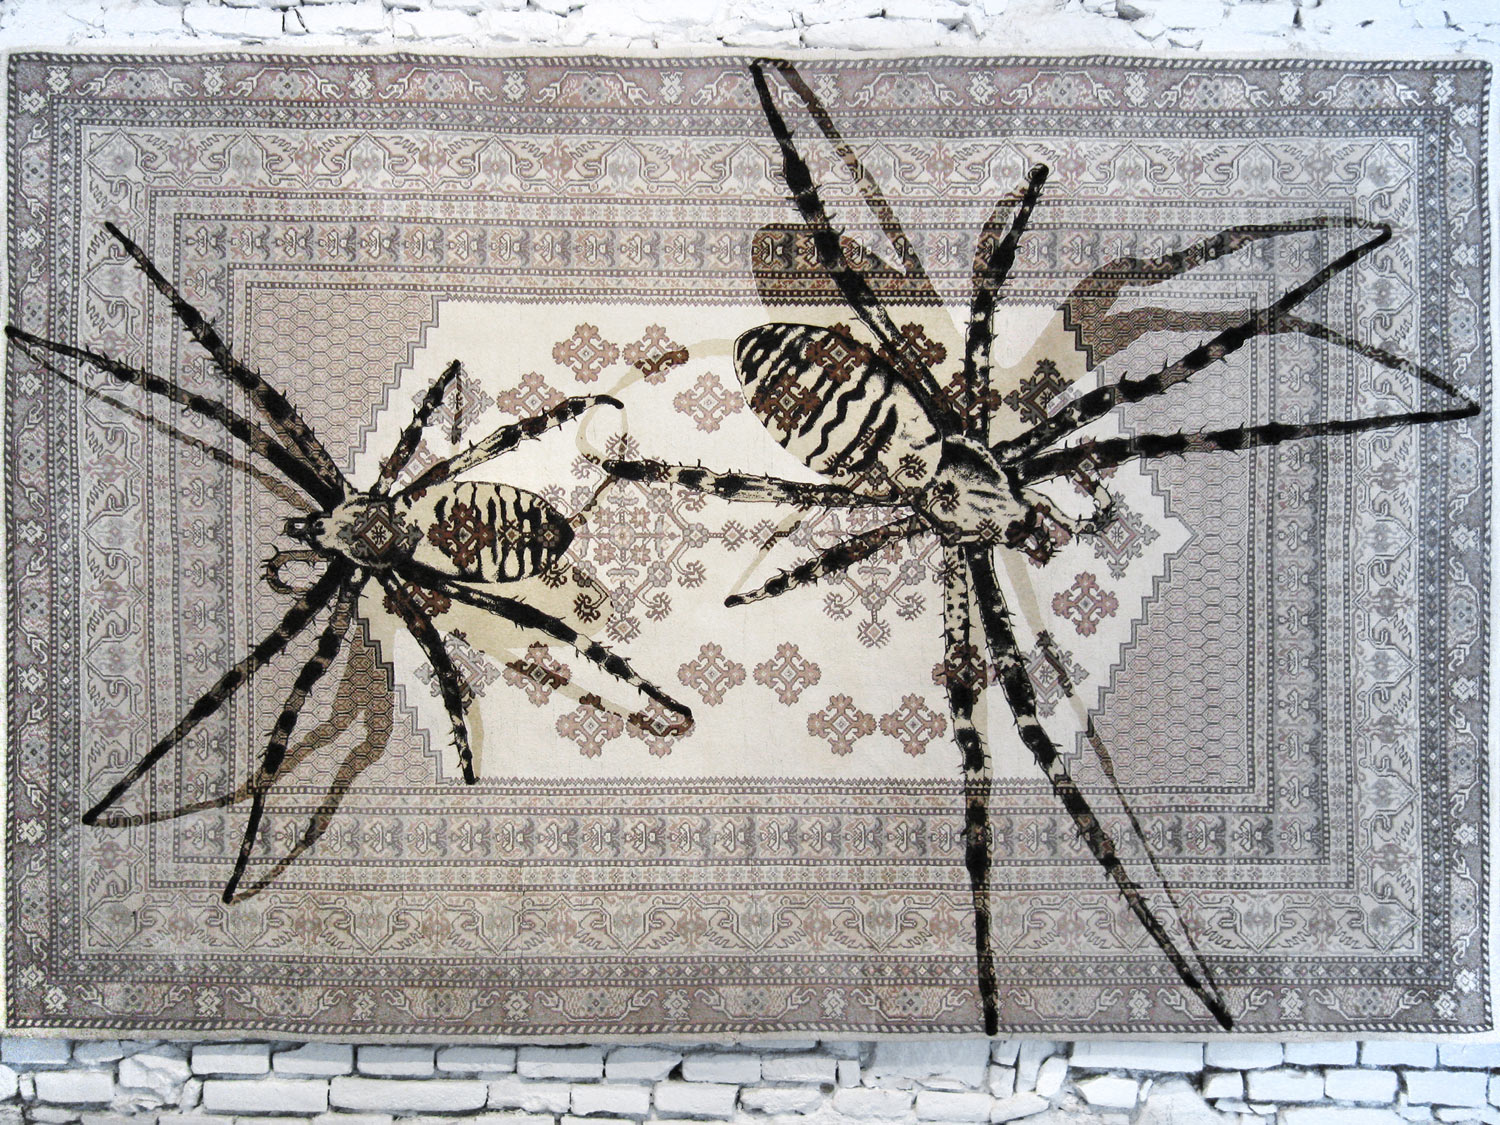 web222-noemi_kiss_prod_kissthereichl_two_spiders_tapestry-overpainted-preloved-oriental-rug-marion-friedmann-gallery.jpg